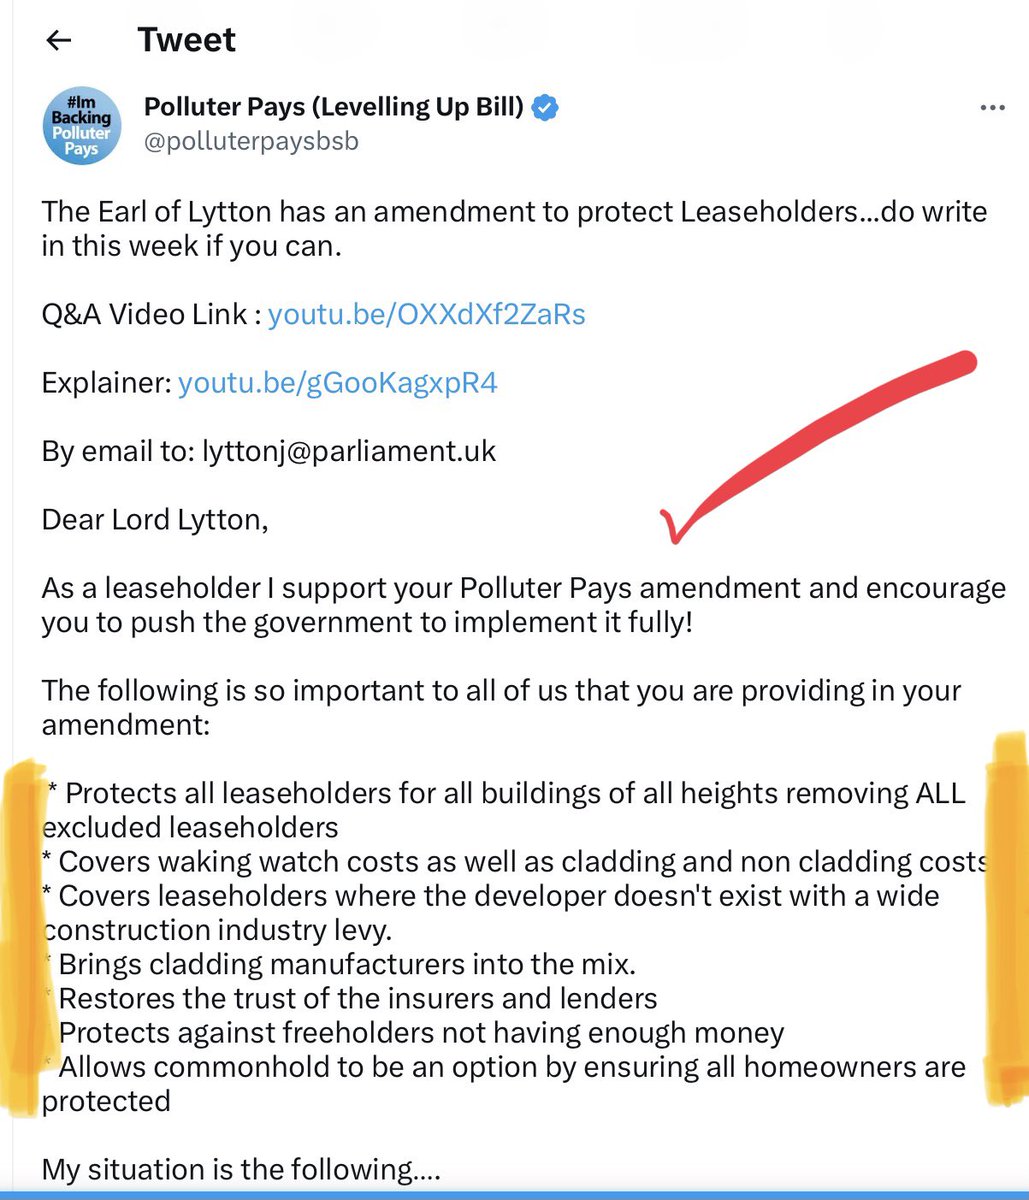 The Earl Of Lytton’s amendment will #PROTECT All #leaseholders for #buildings of ALL heights. Cover #wakingwatch £, #cladding & non cladding £.⭐️ Cover LHs where developer doesn’t exist with a wide #constructionlevy.⭐️Bring #claddingmanufacturers into the mix & MORE. Email now 👍